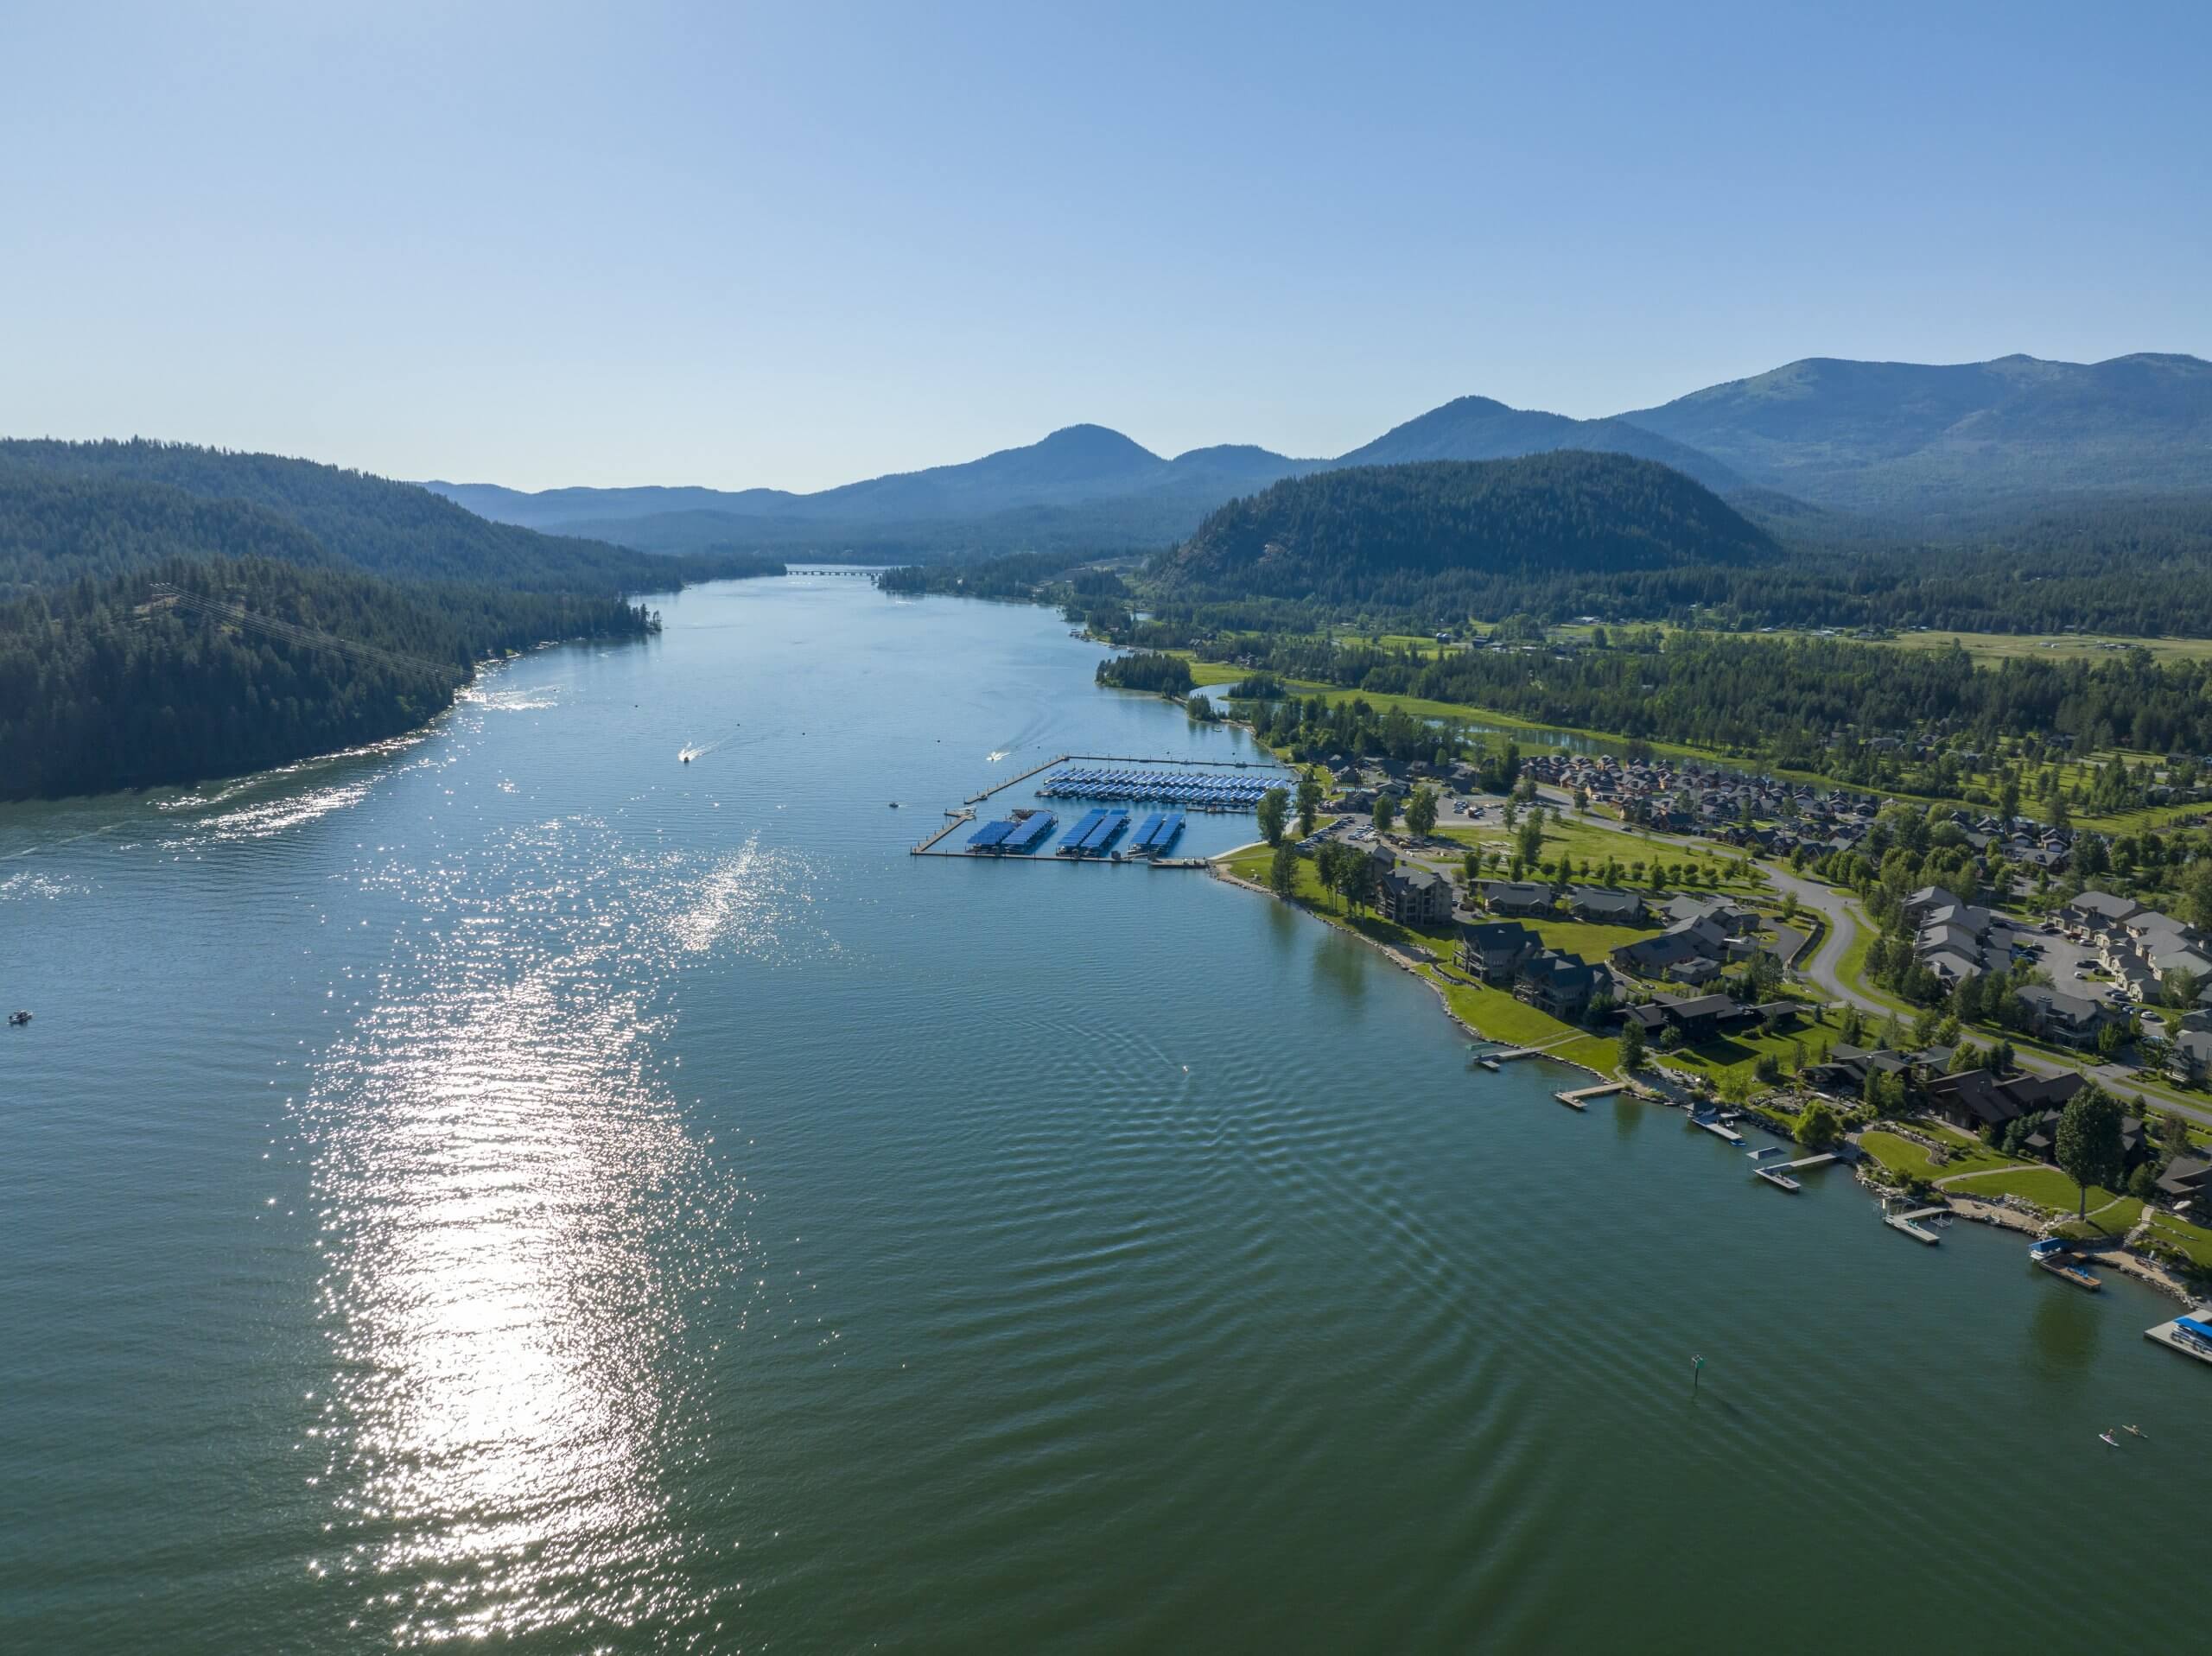 View of Dover Bay Resort on the Pend Oreille River.